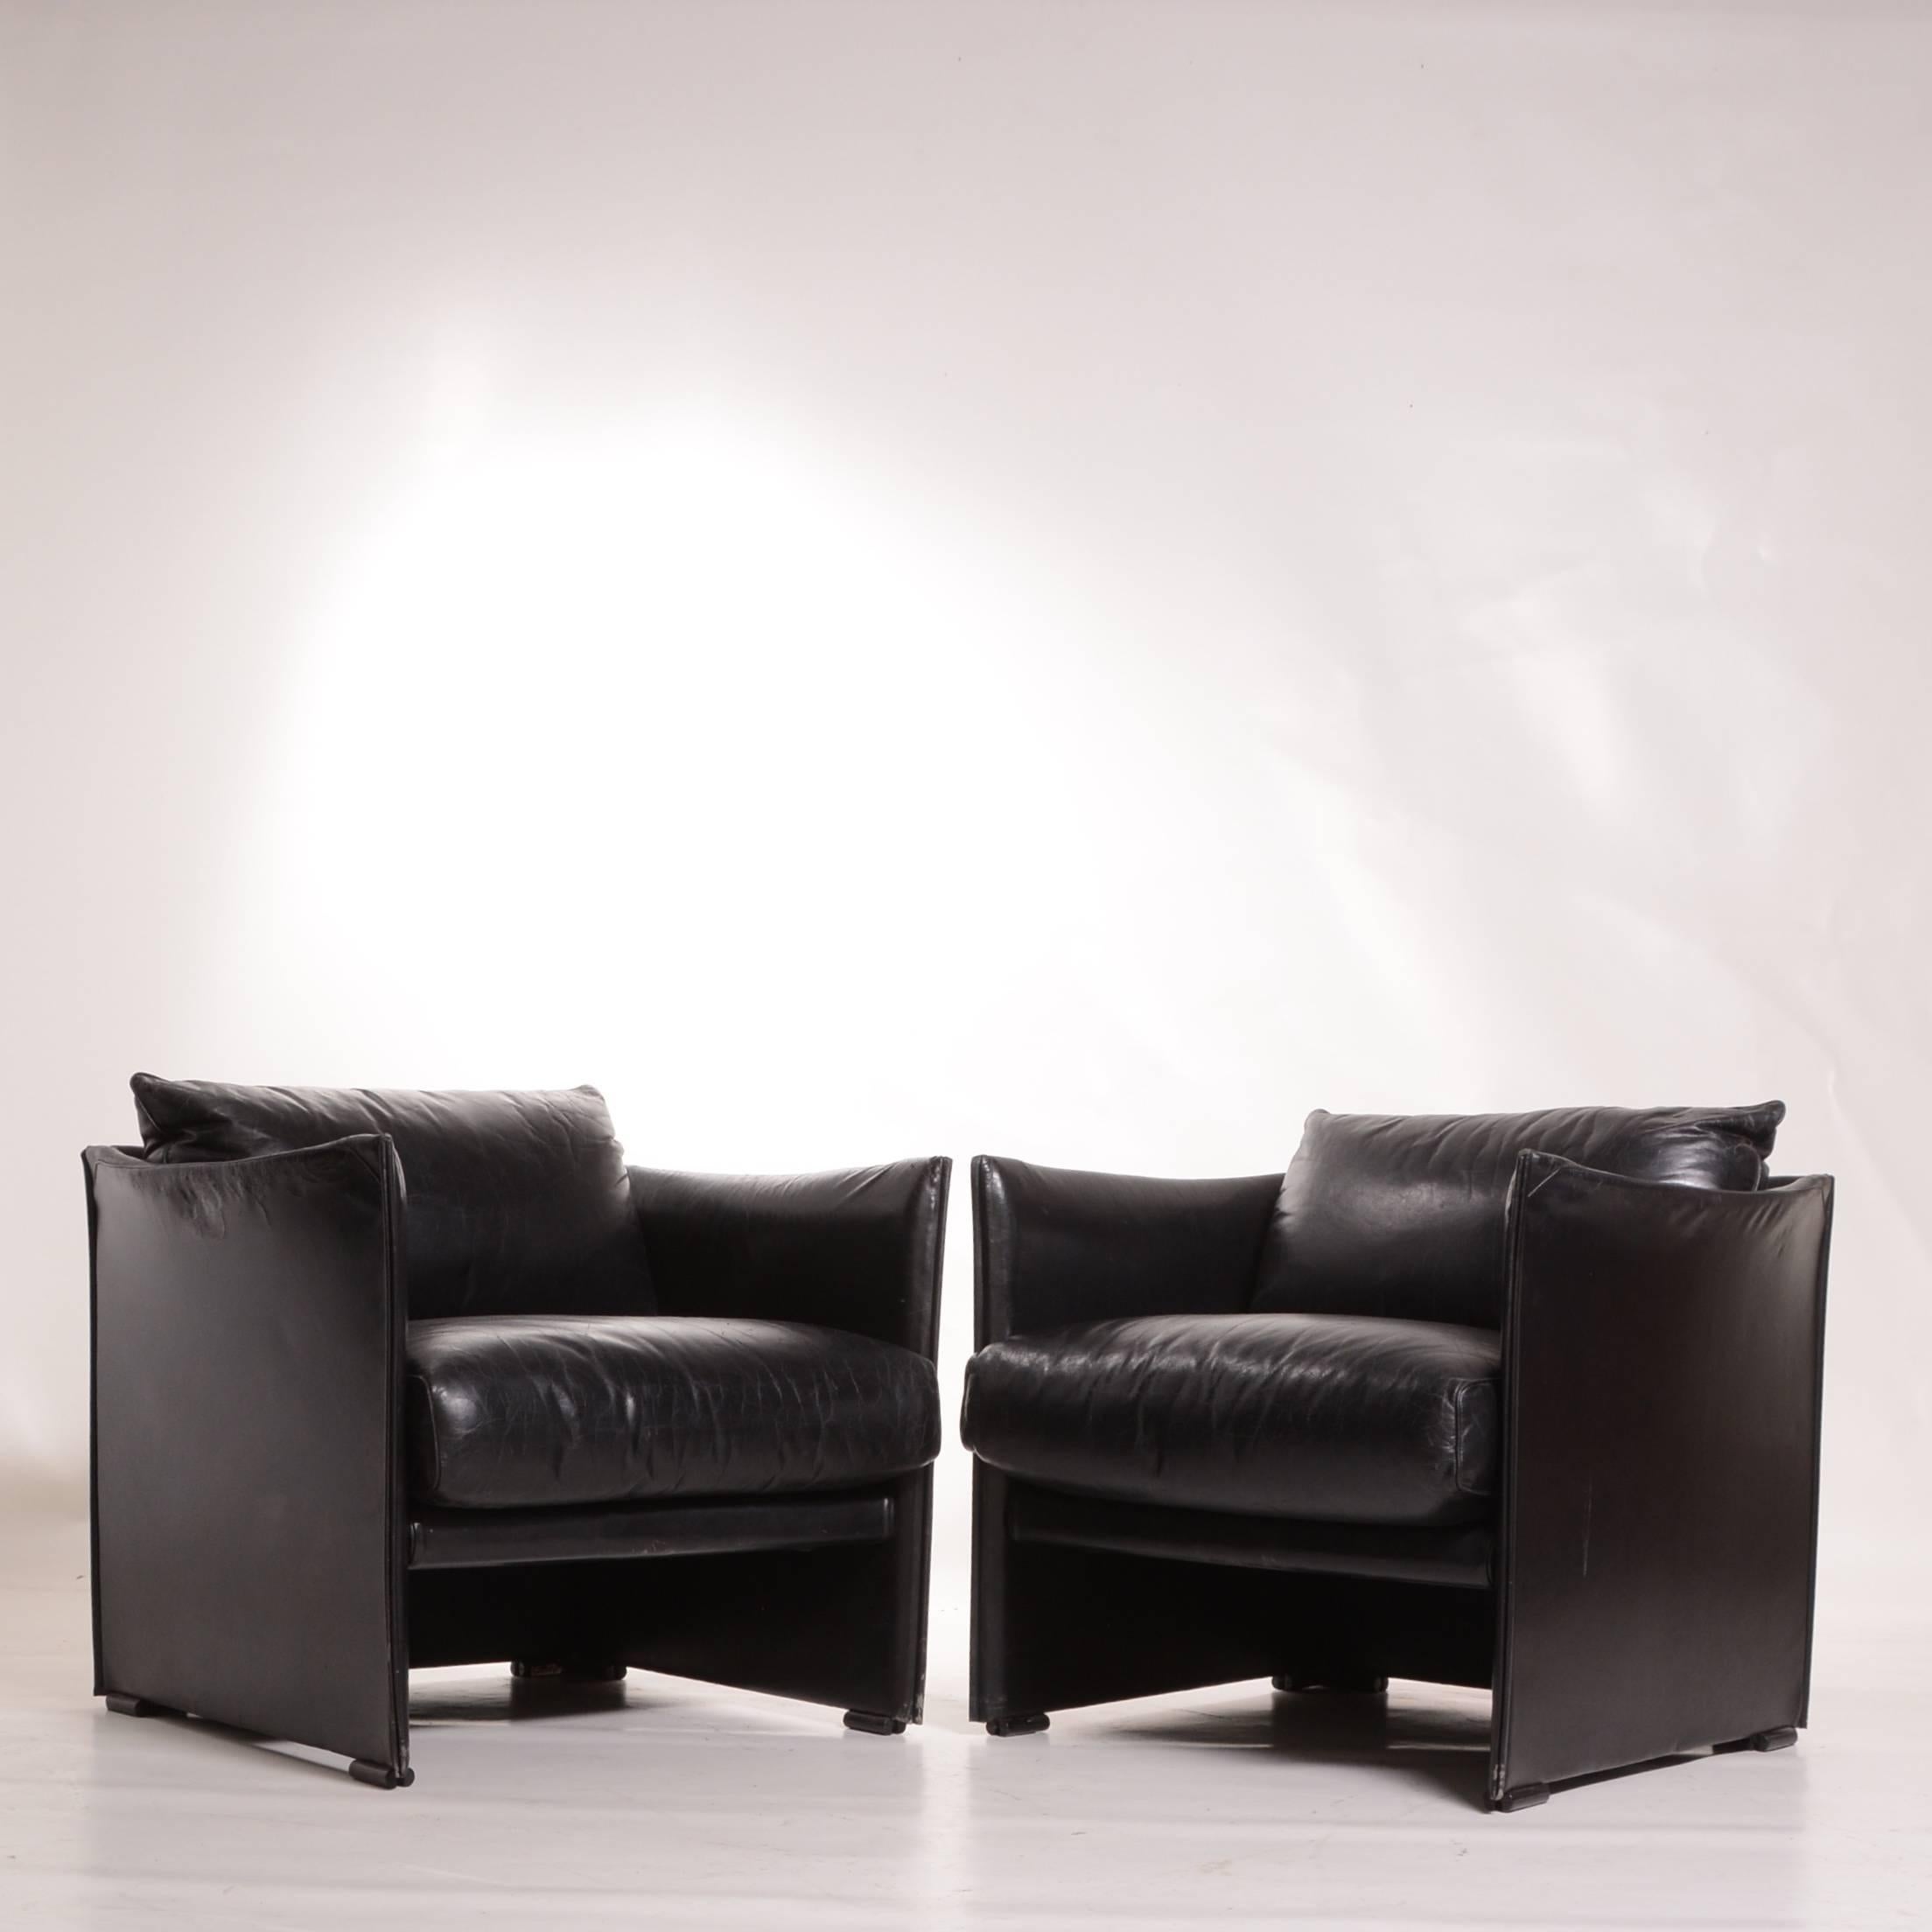 Pair of rare lounge chairs by Vico Magistretti for Cassina.  